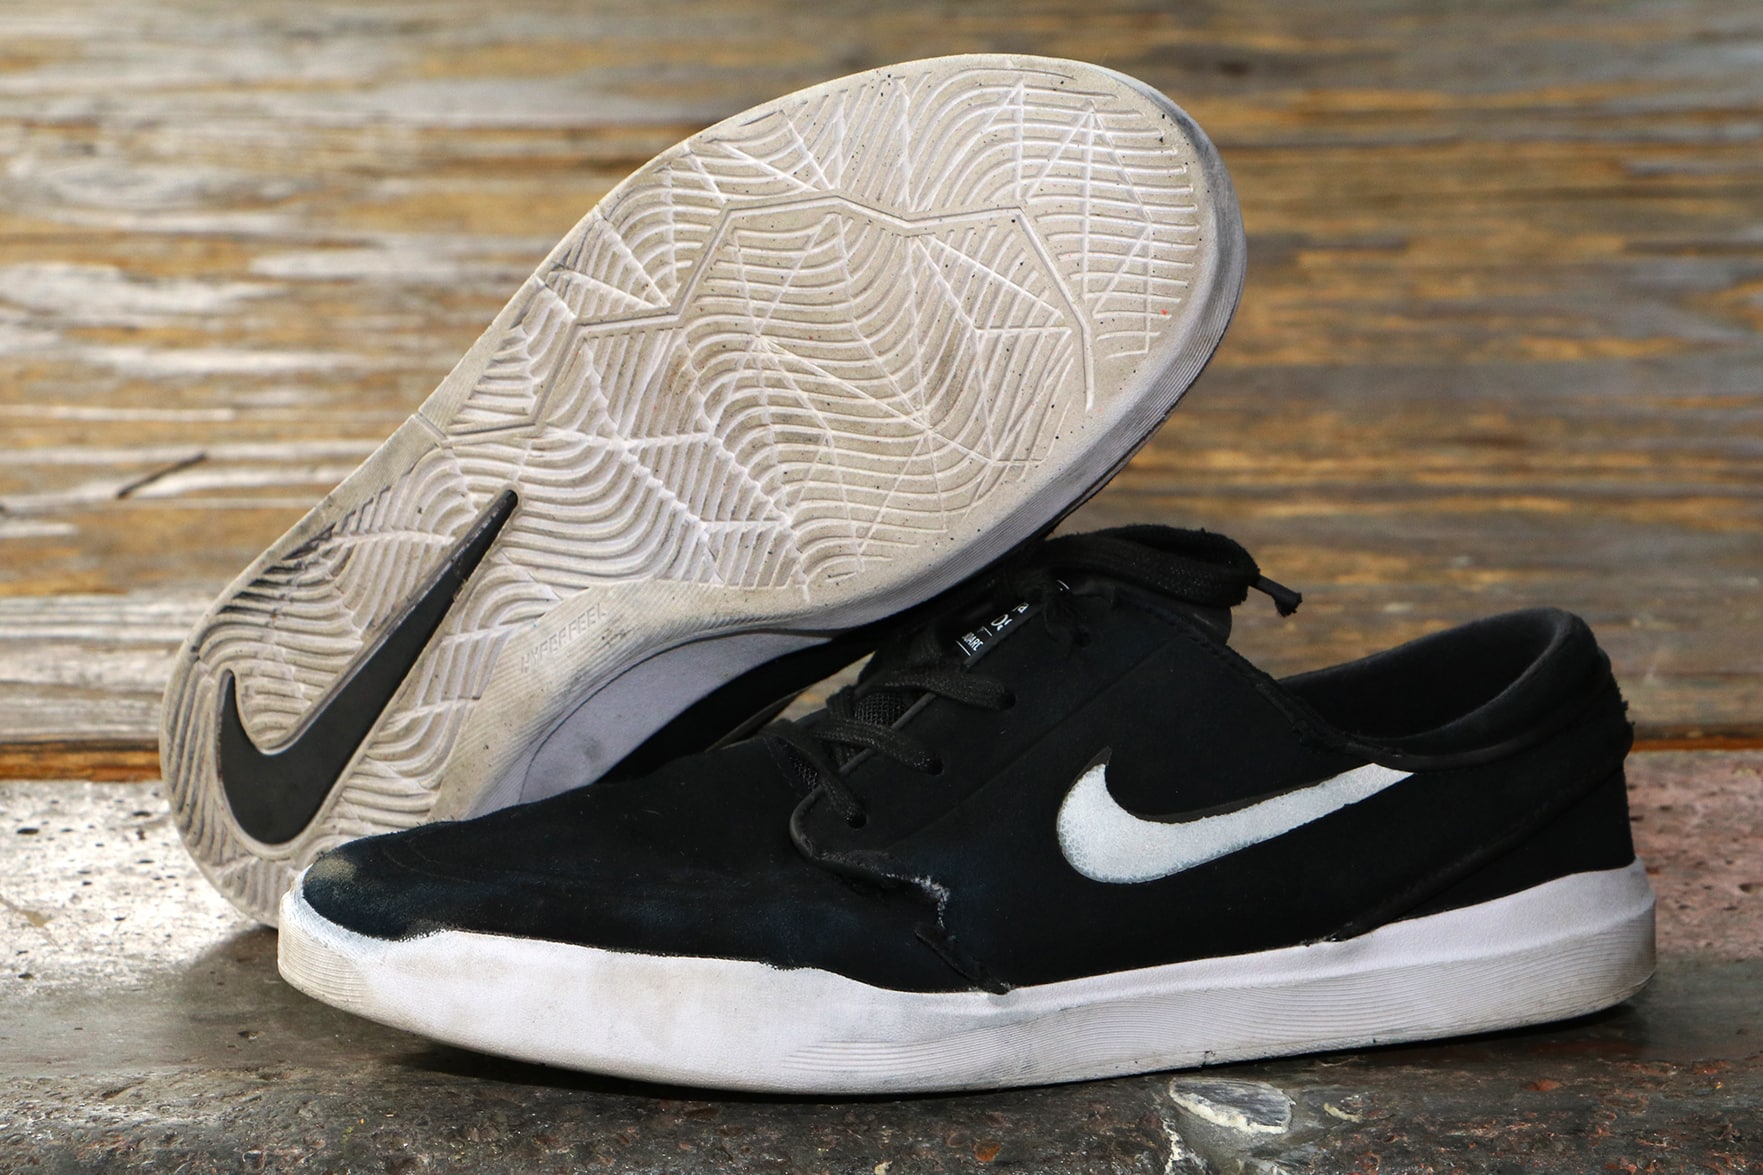 Misery Shiny can not see Nike SB Janoski Hyperfeel Skate Shoes Wear Test Review | Tactics